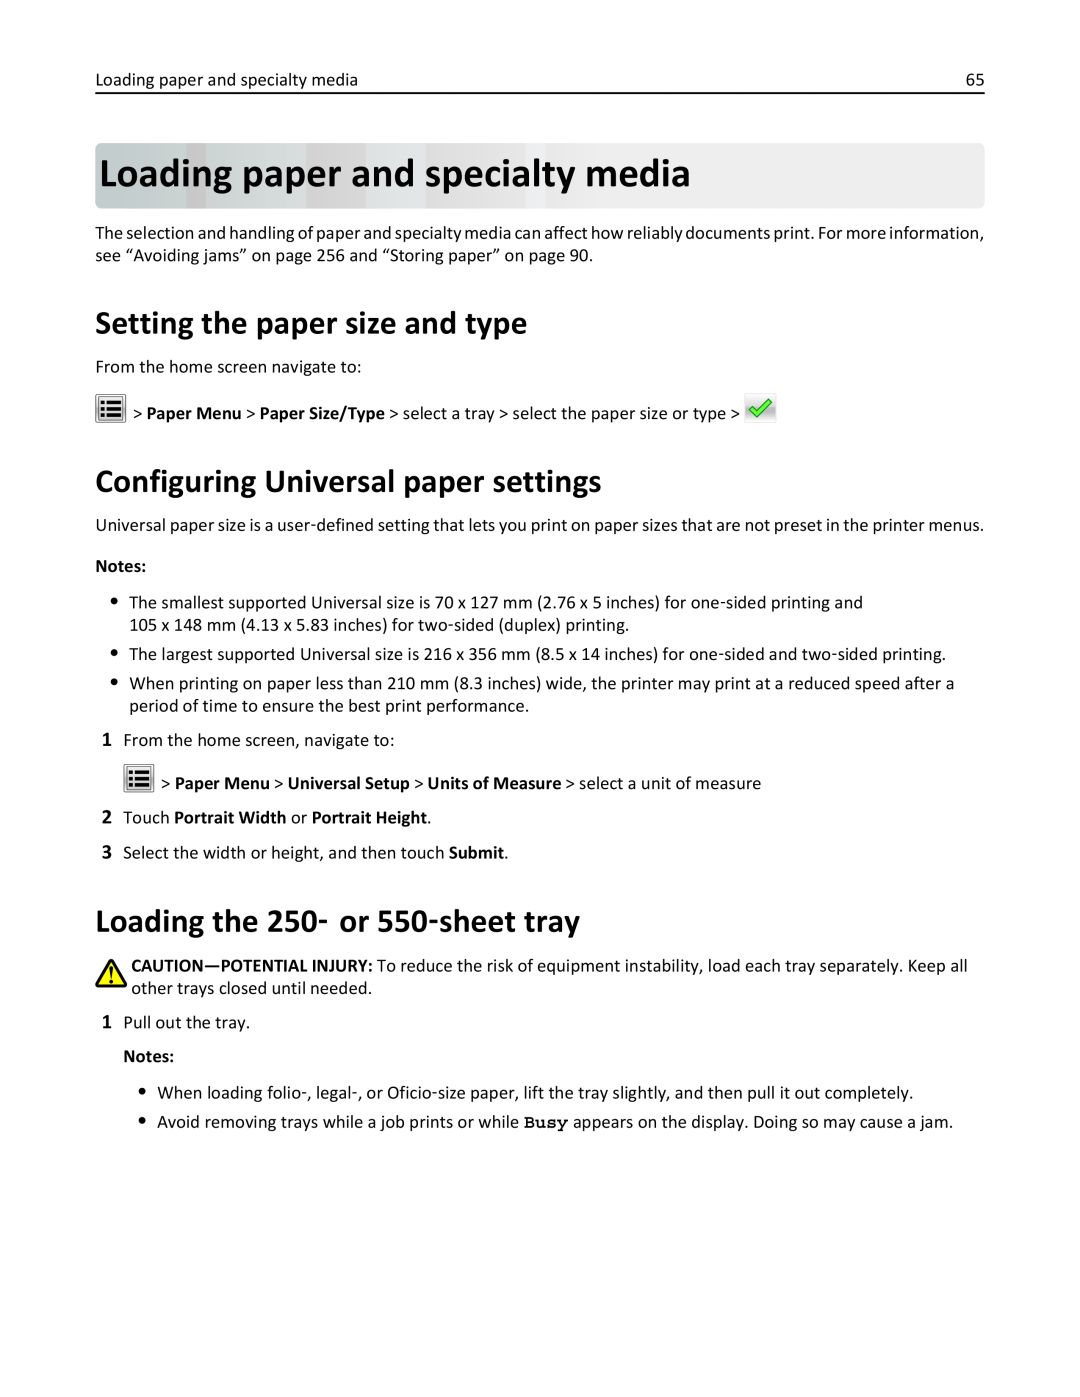 Lexmark MX710DHE Loadingpaperand specialty media, Setting the paper size and type, Configuring Universal paper settings 